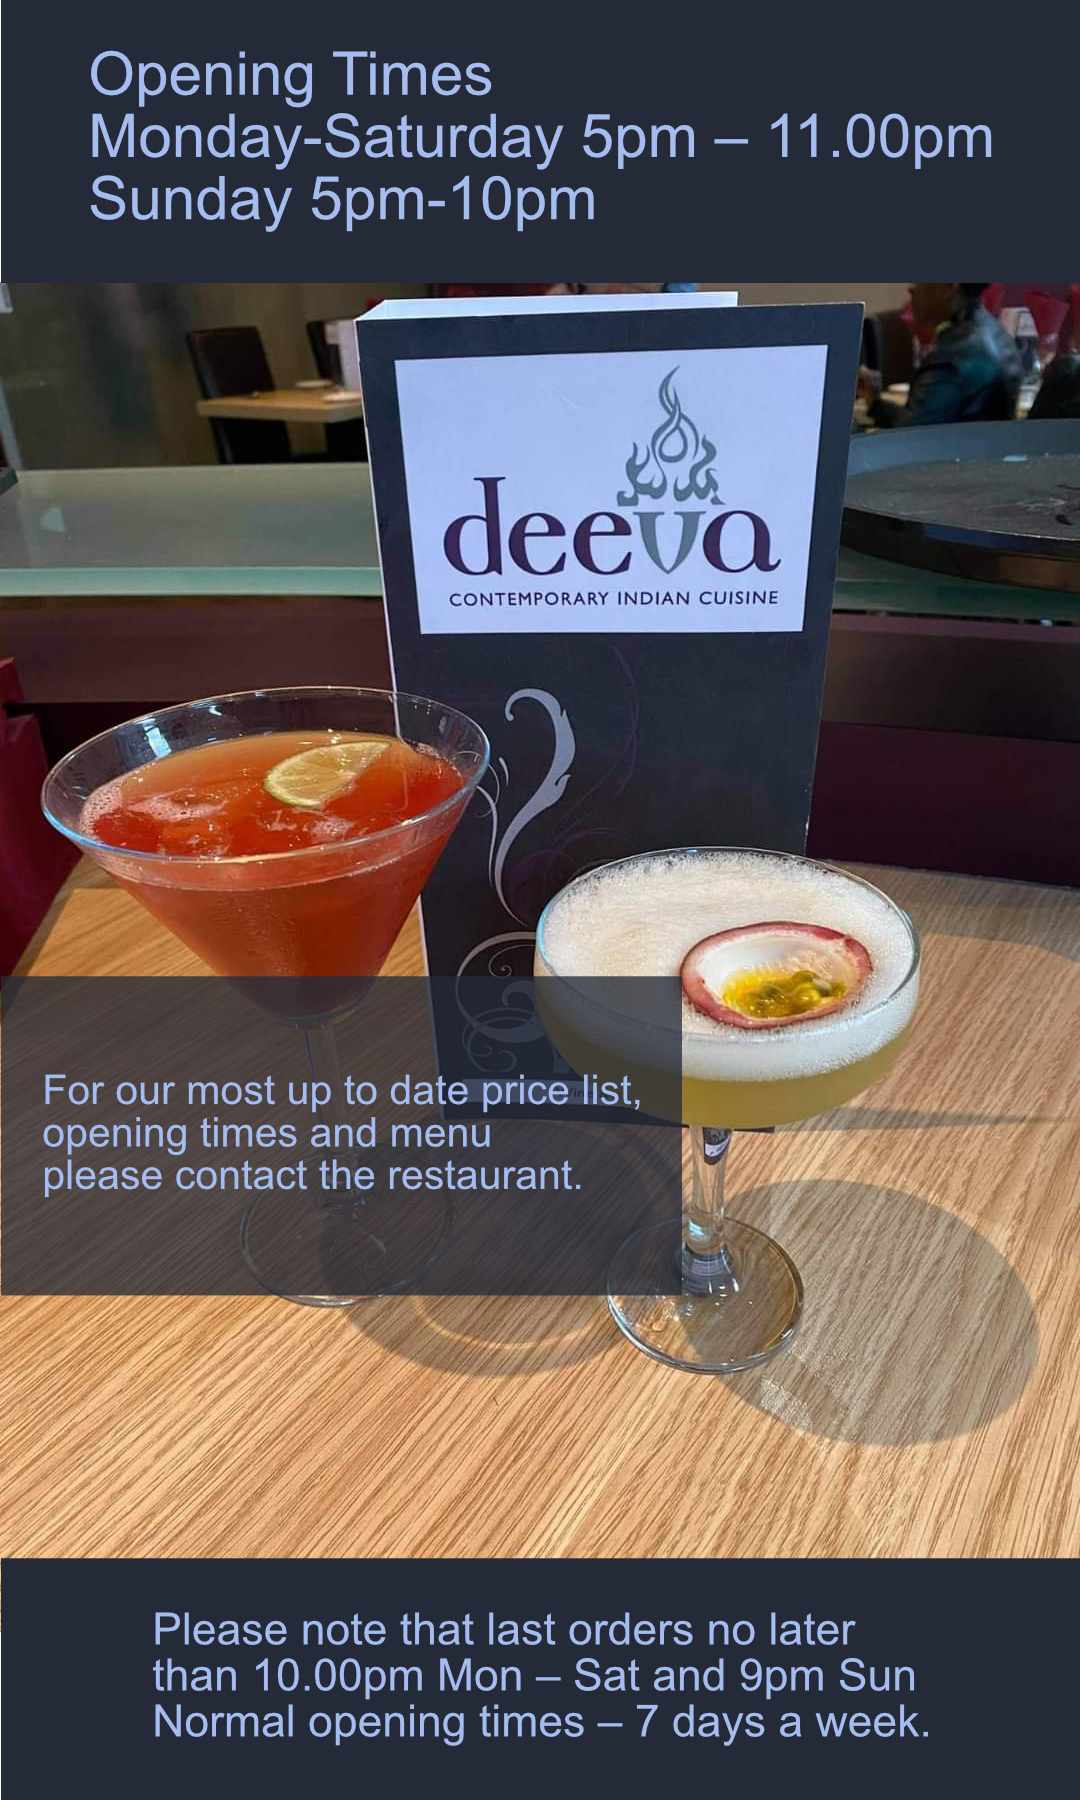 Click Image for Opening Times at Deeva Restaurant